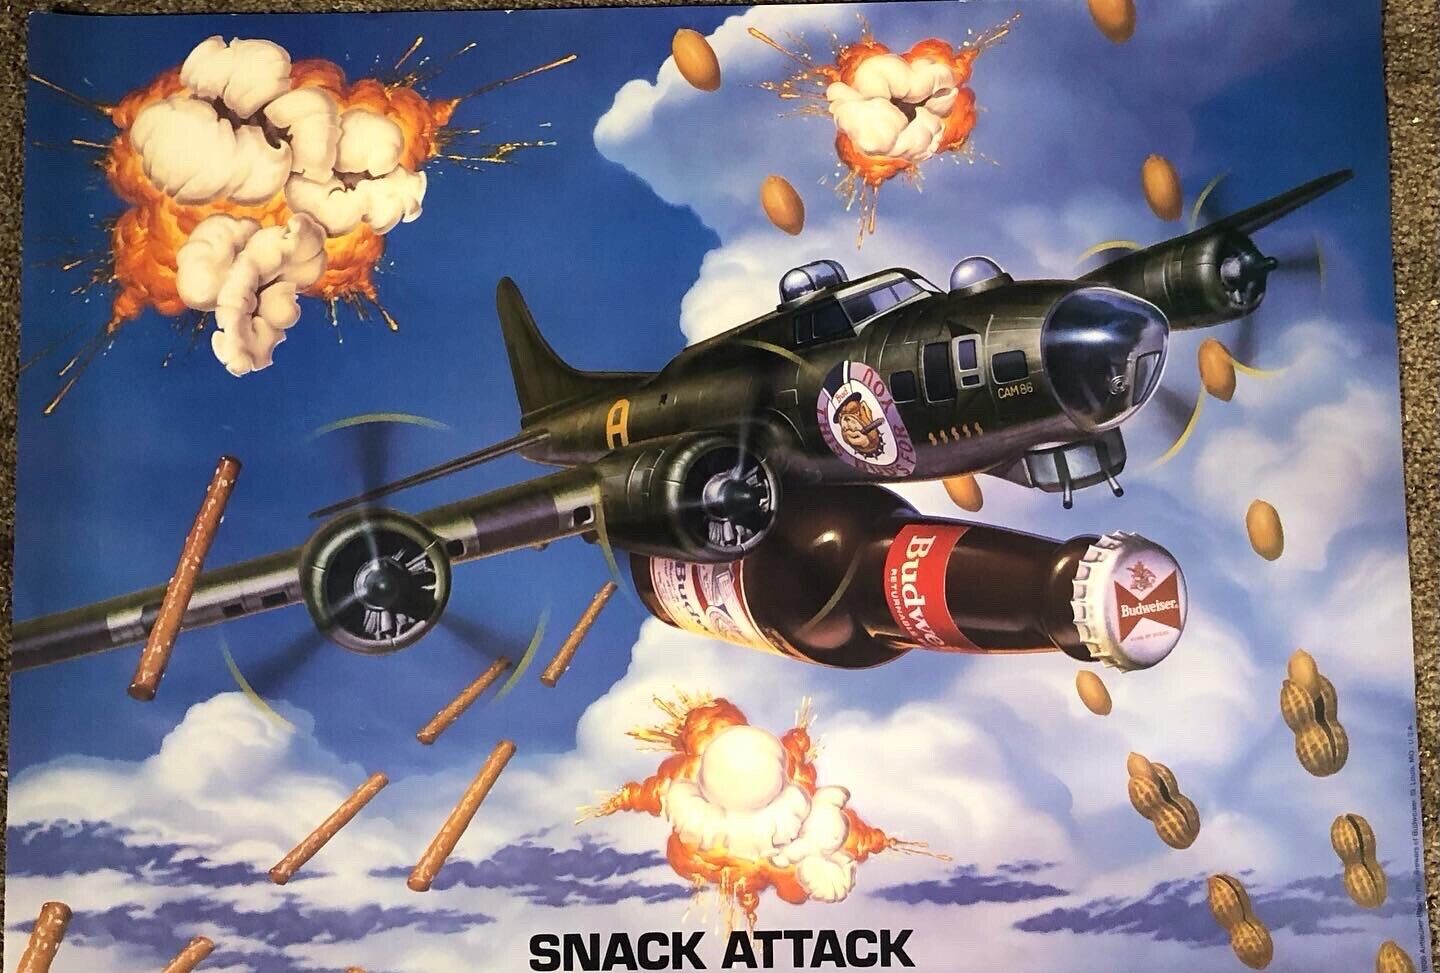 1986 Budweiser “Snack Attack” Posters